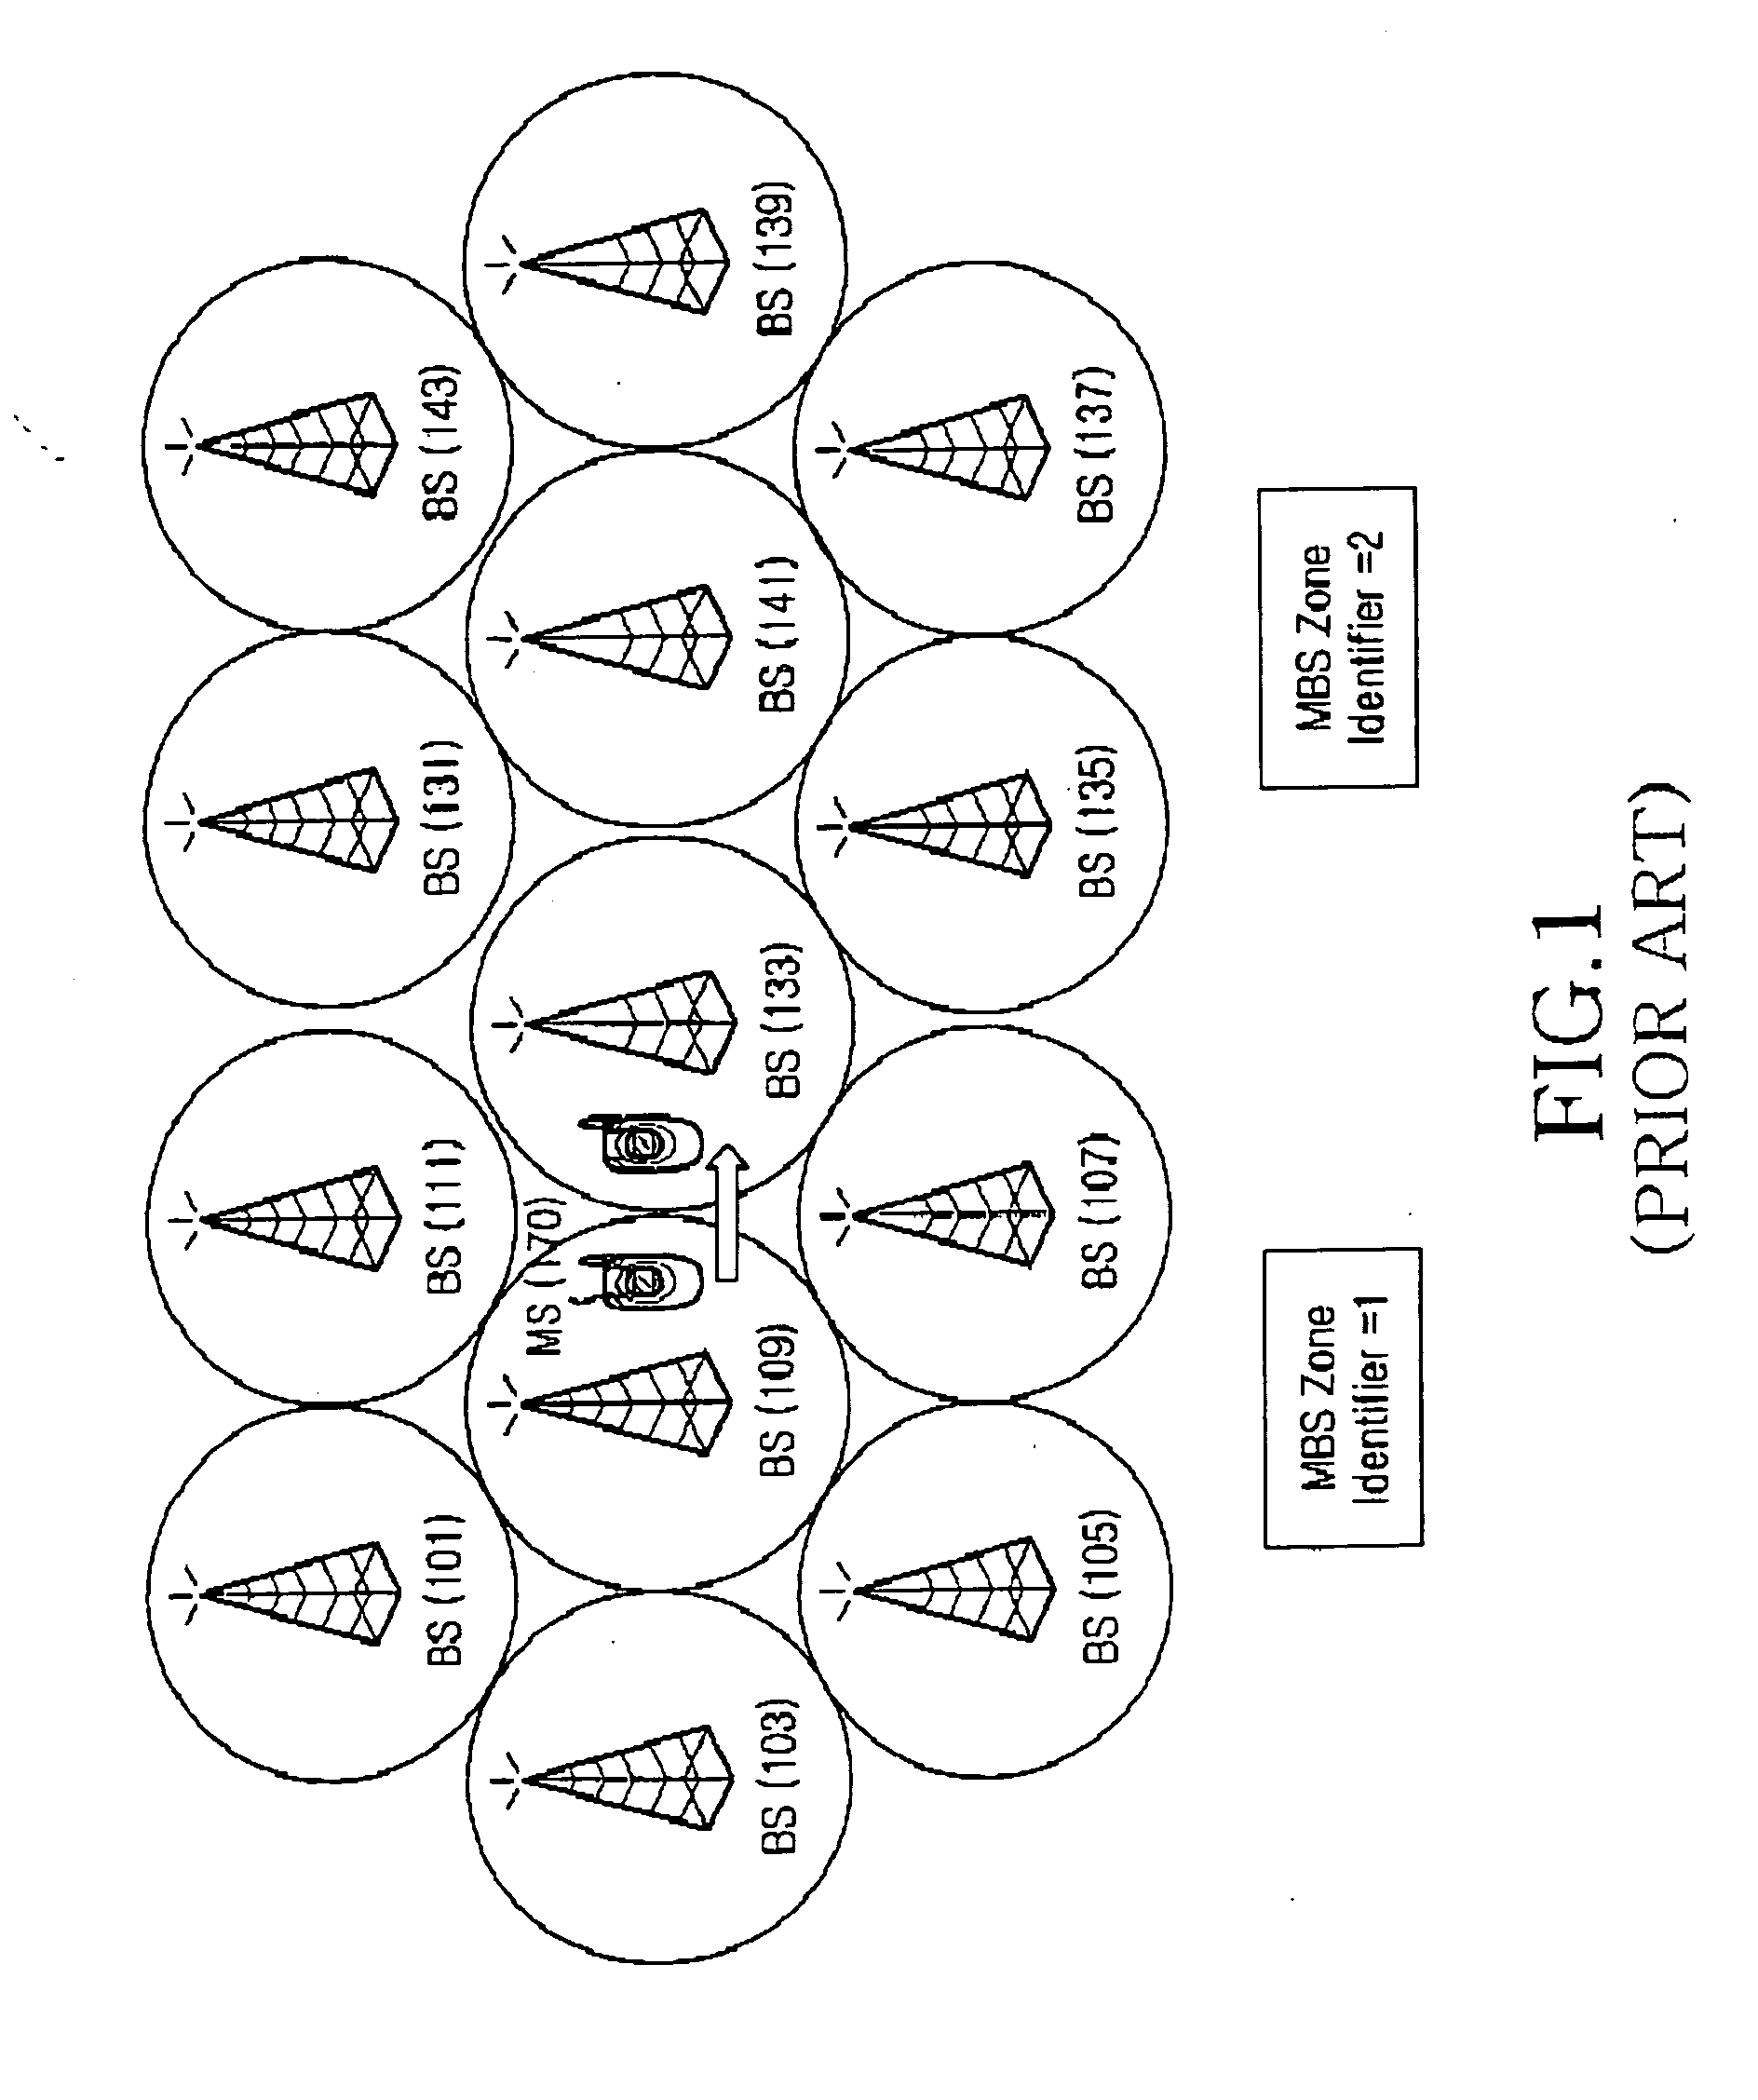 System and method for providing broadcast service in a mobile communication system